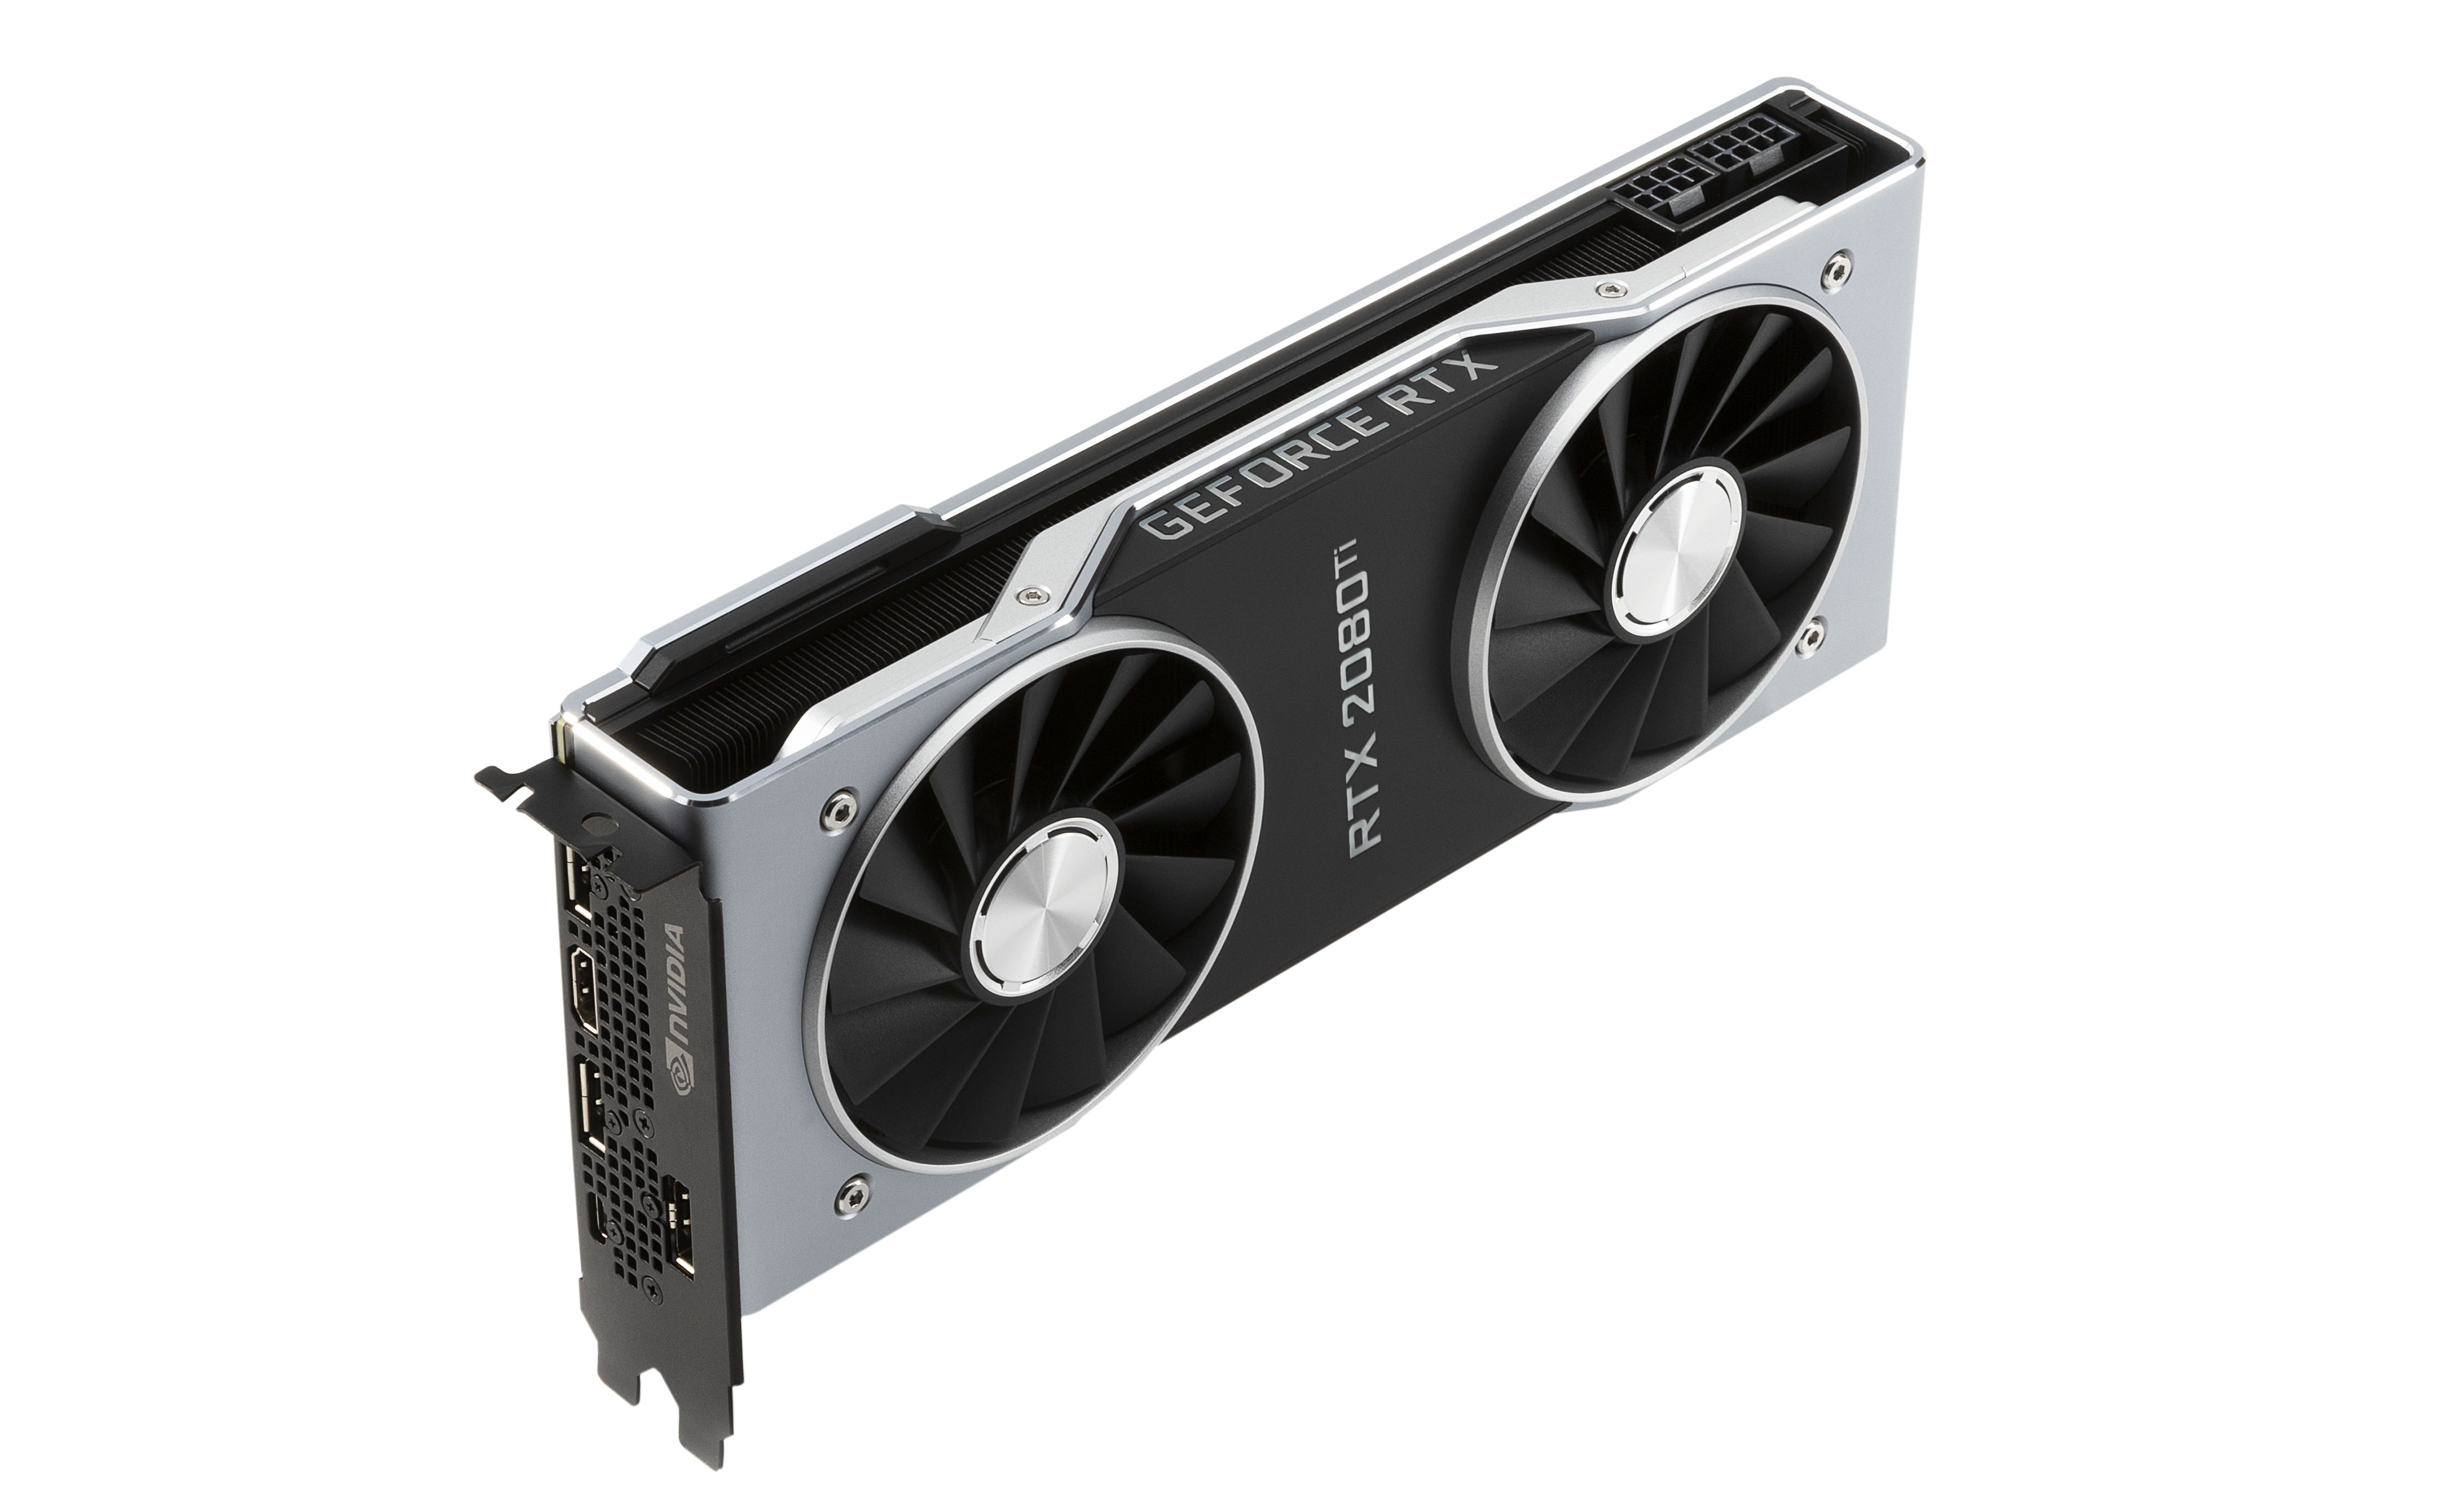 Fremtrædende Uovertruffen Nordamerika Meet The GeForce RTX 2080 Ti & RTX 2080 Founders Editions Cards - The NVIDIA  GeForce RTX 2080 Ti & RTX 2080 Founders Edition Review: Foundations For A  Ray Traced Future